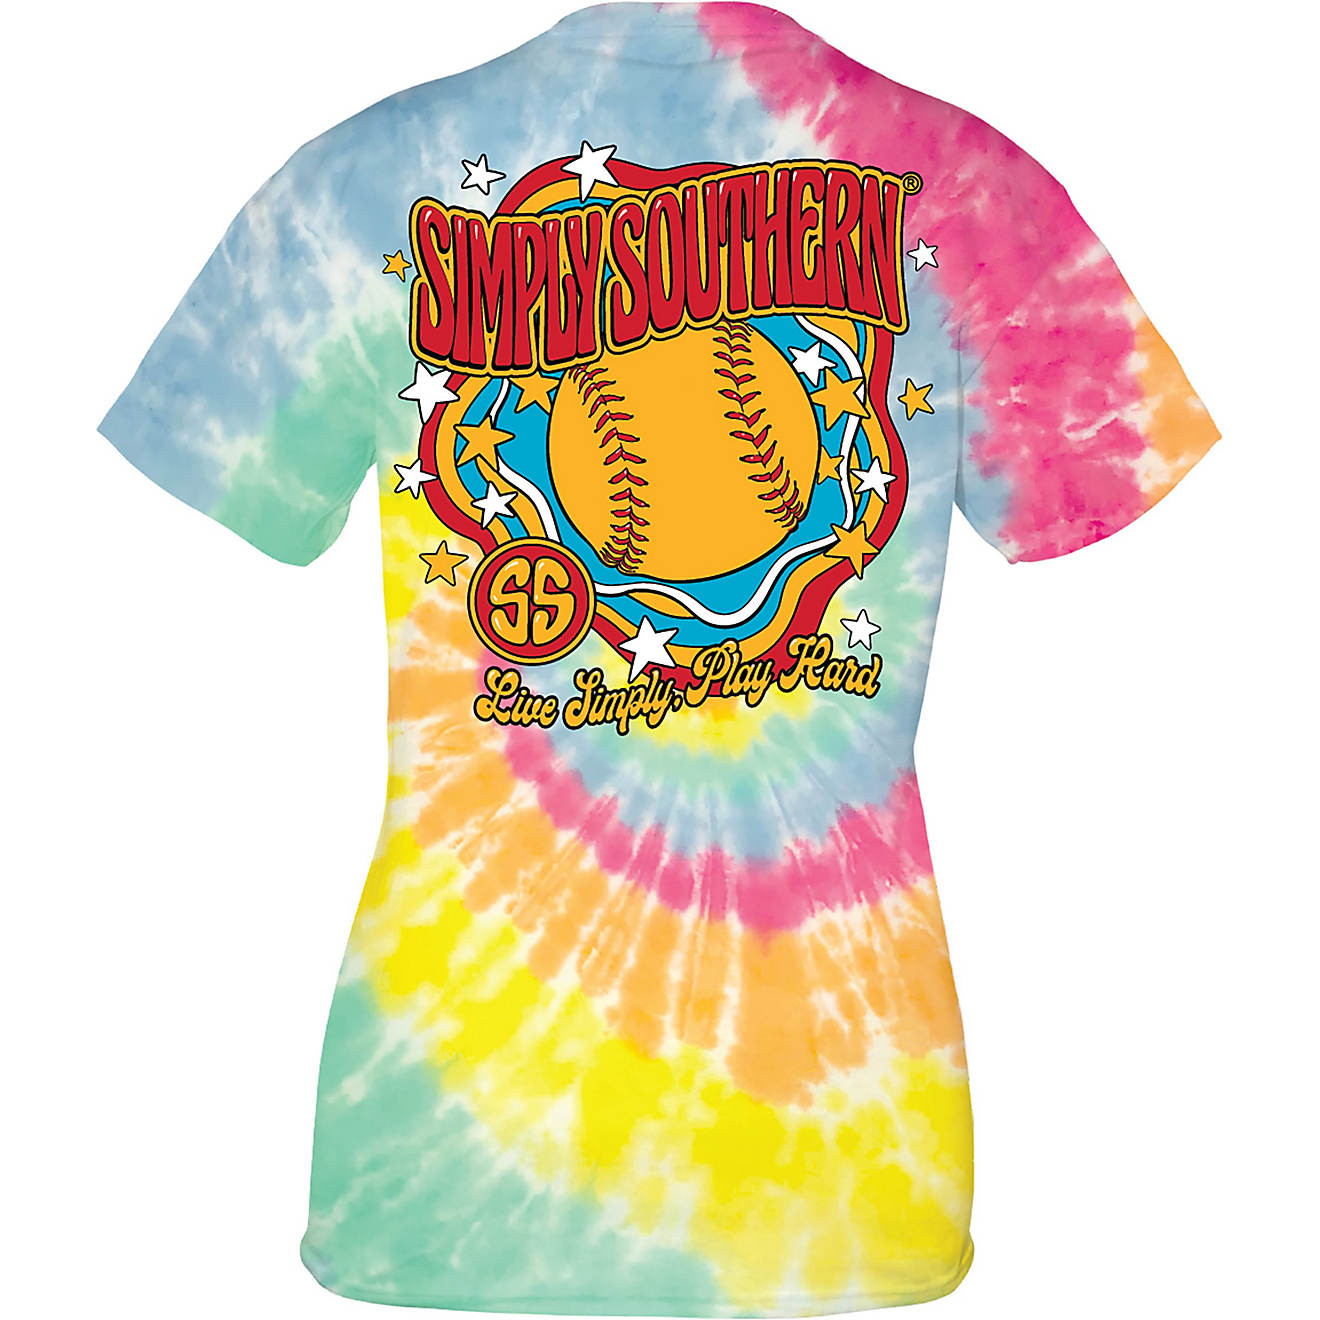 Simply Southern Women's Vintage Softball Graphic T-shirt                                                                         - view number 1